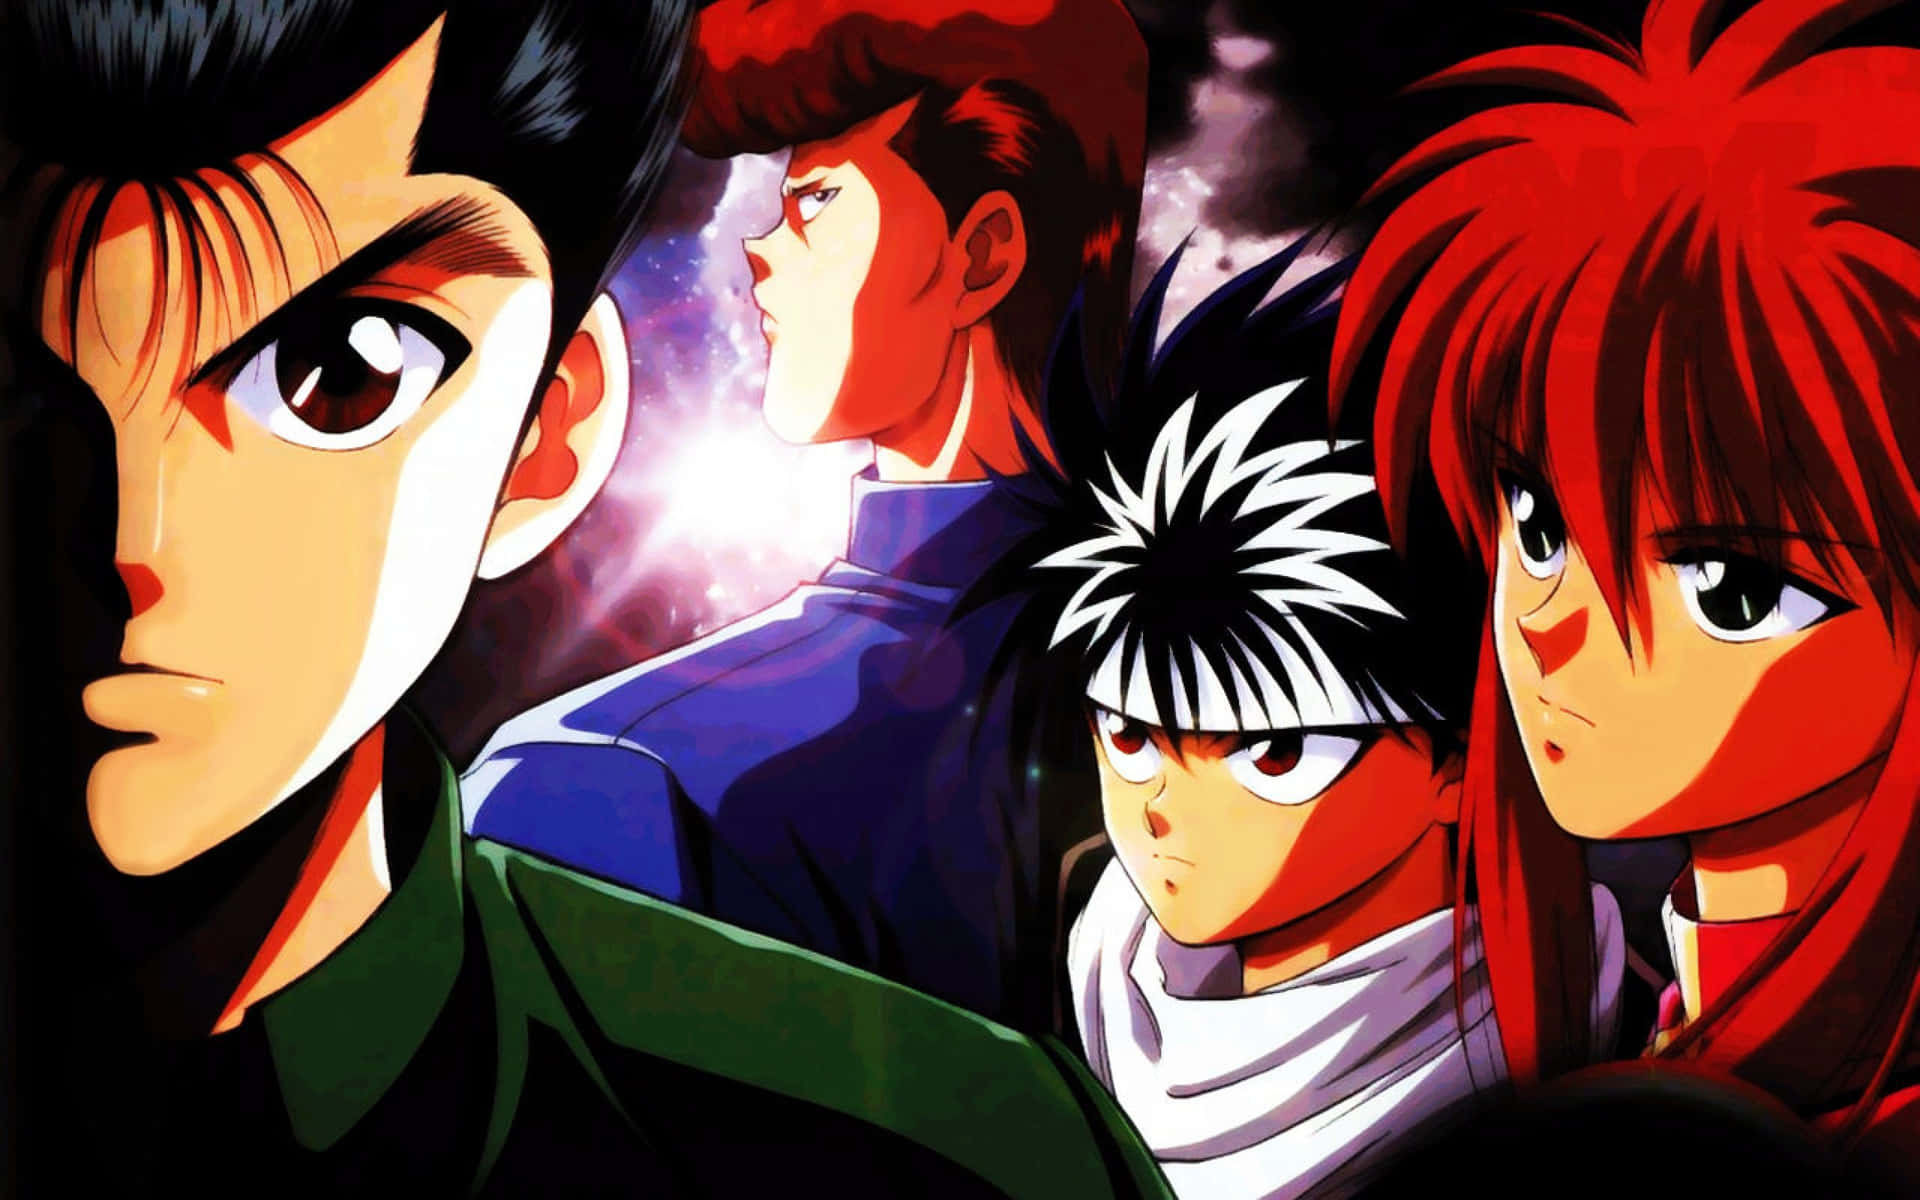 The Best Yu Yu Hakusho Anime Review of All Time